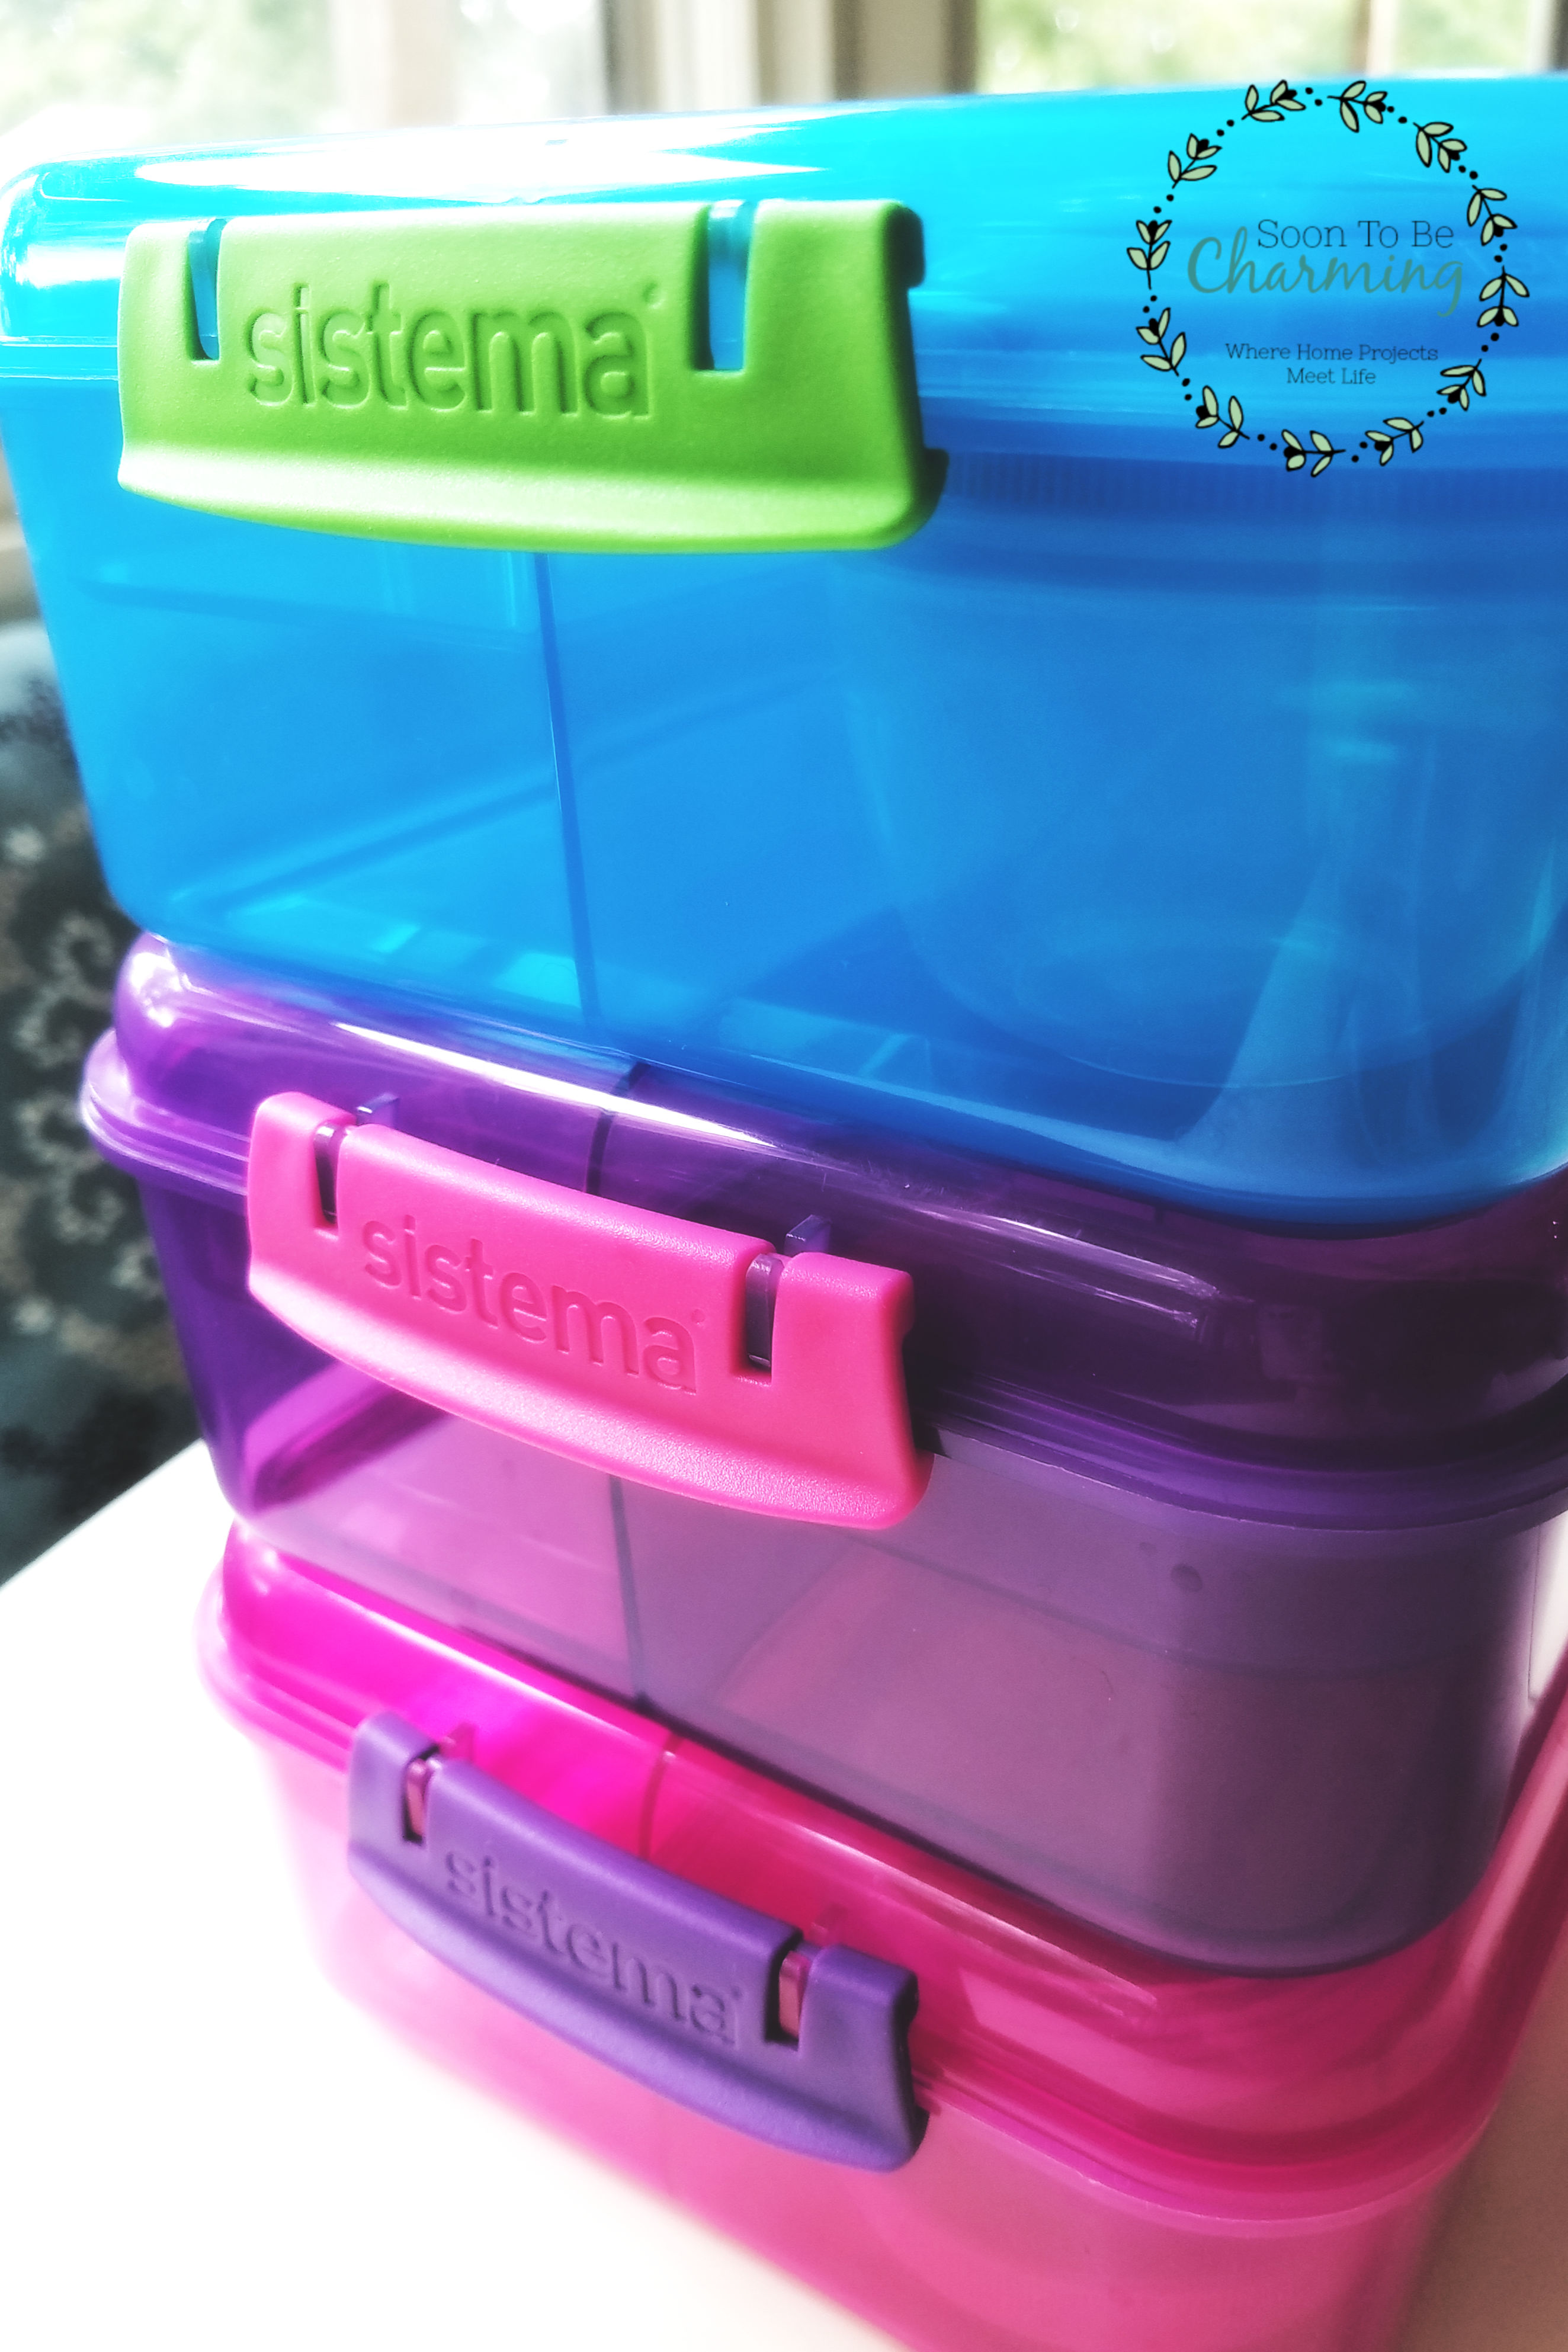 Packing your kid's school lunch is easy with the Sistema Bento Lunch T